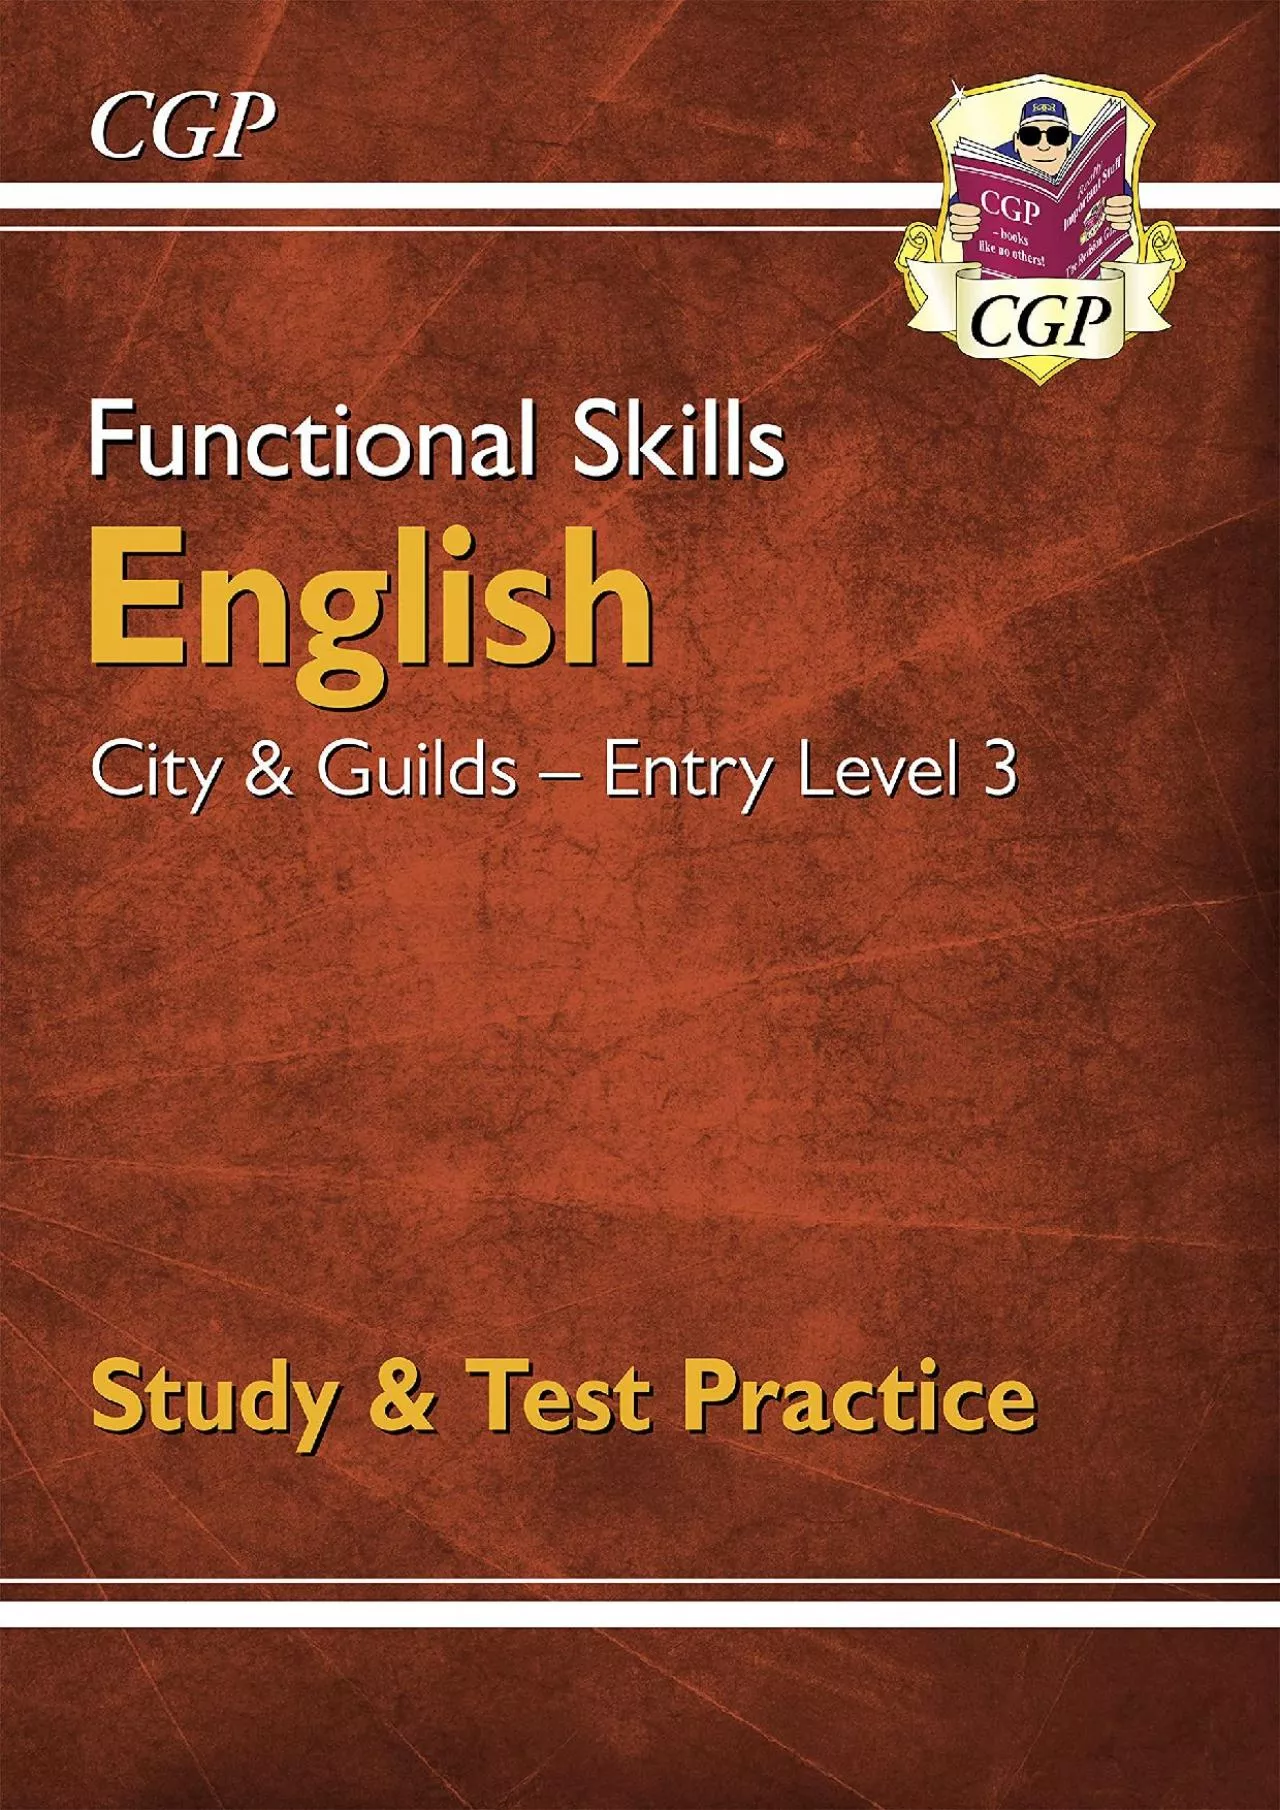 [READ] Functional Skills English: City  Guilds Entry Level 3 - Study  Test Practice for